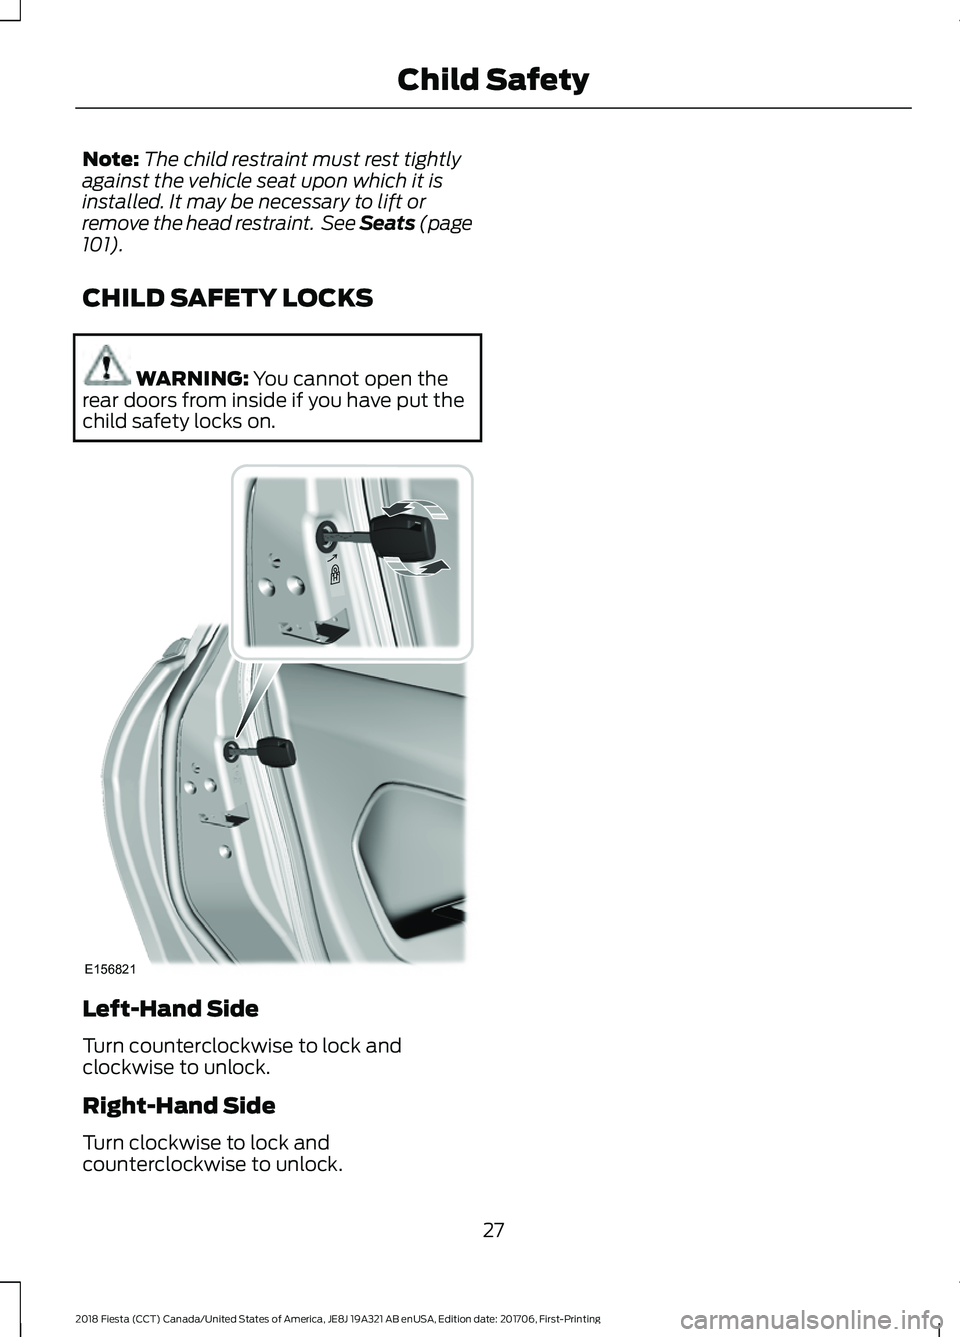 FORD FIESTA 2018  Owners Manual Note:
The child restraint must rest tightly
against the vehicle seat upon which it is
installed. It may be necessary to lift or
remove the head restraint.  See Seats (page
101).
CHILD SAFETY LOCKS WAR